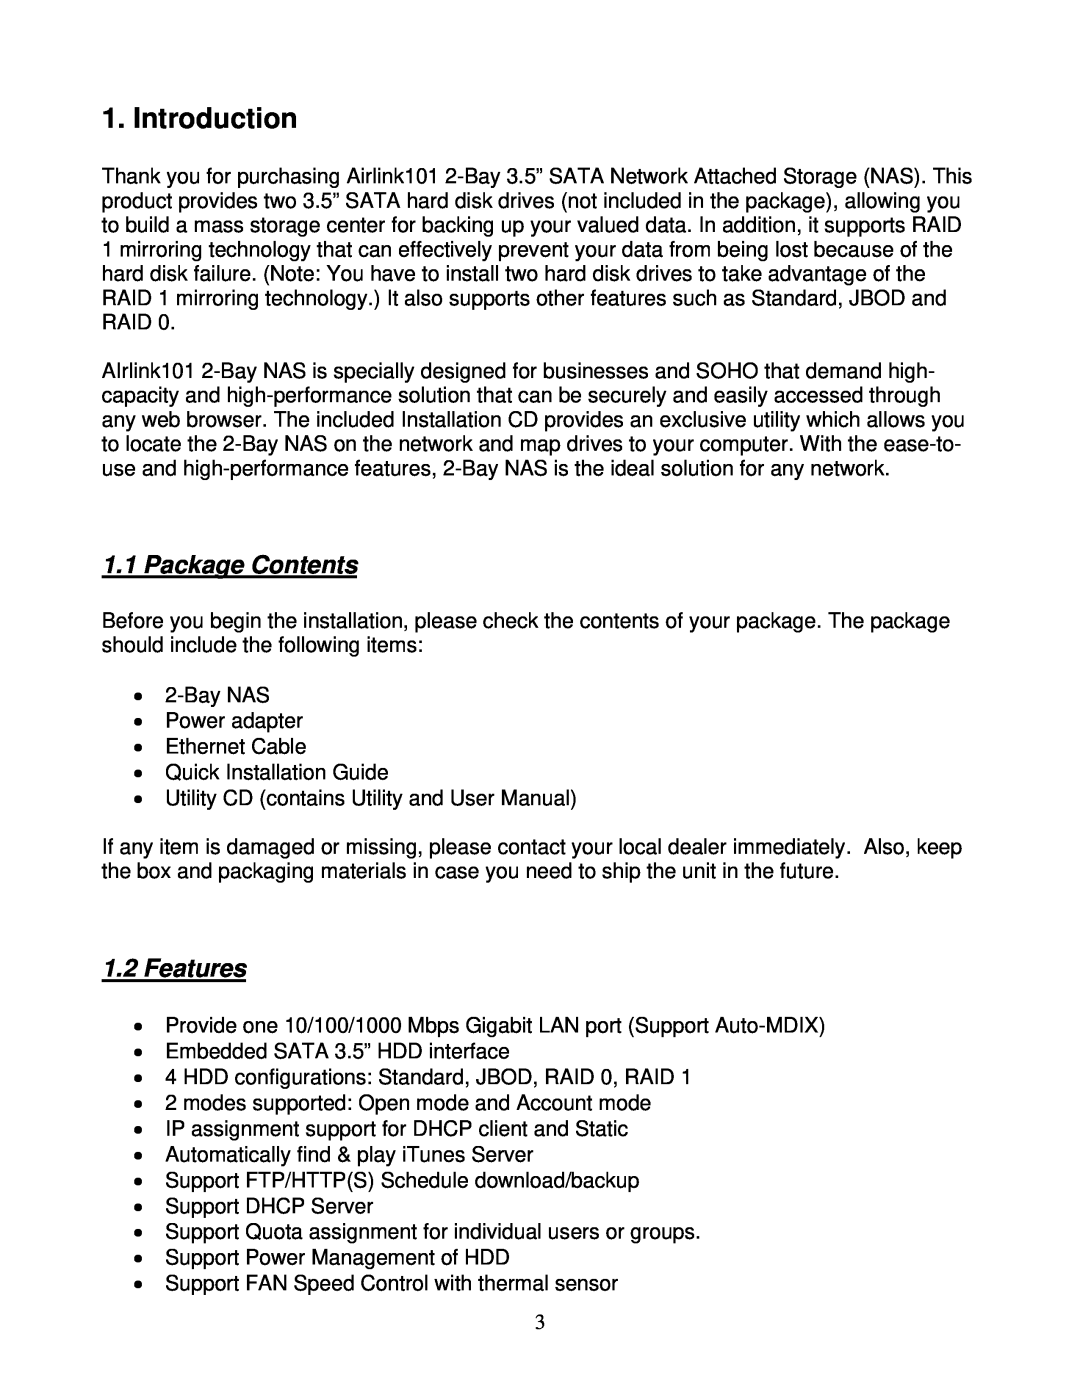 Airlink101 ANAS550 user manual Introduction, Package Contents, Features 